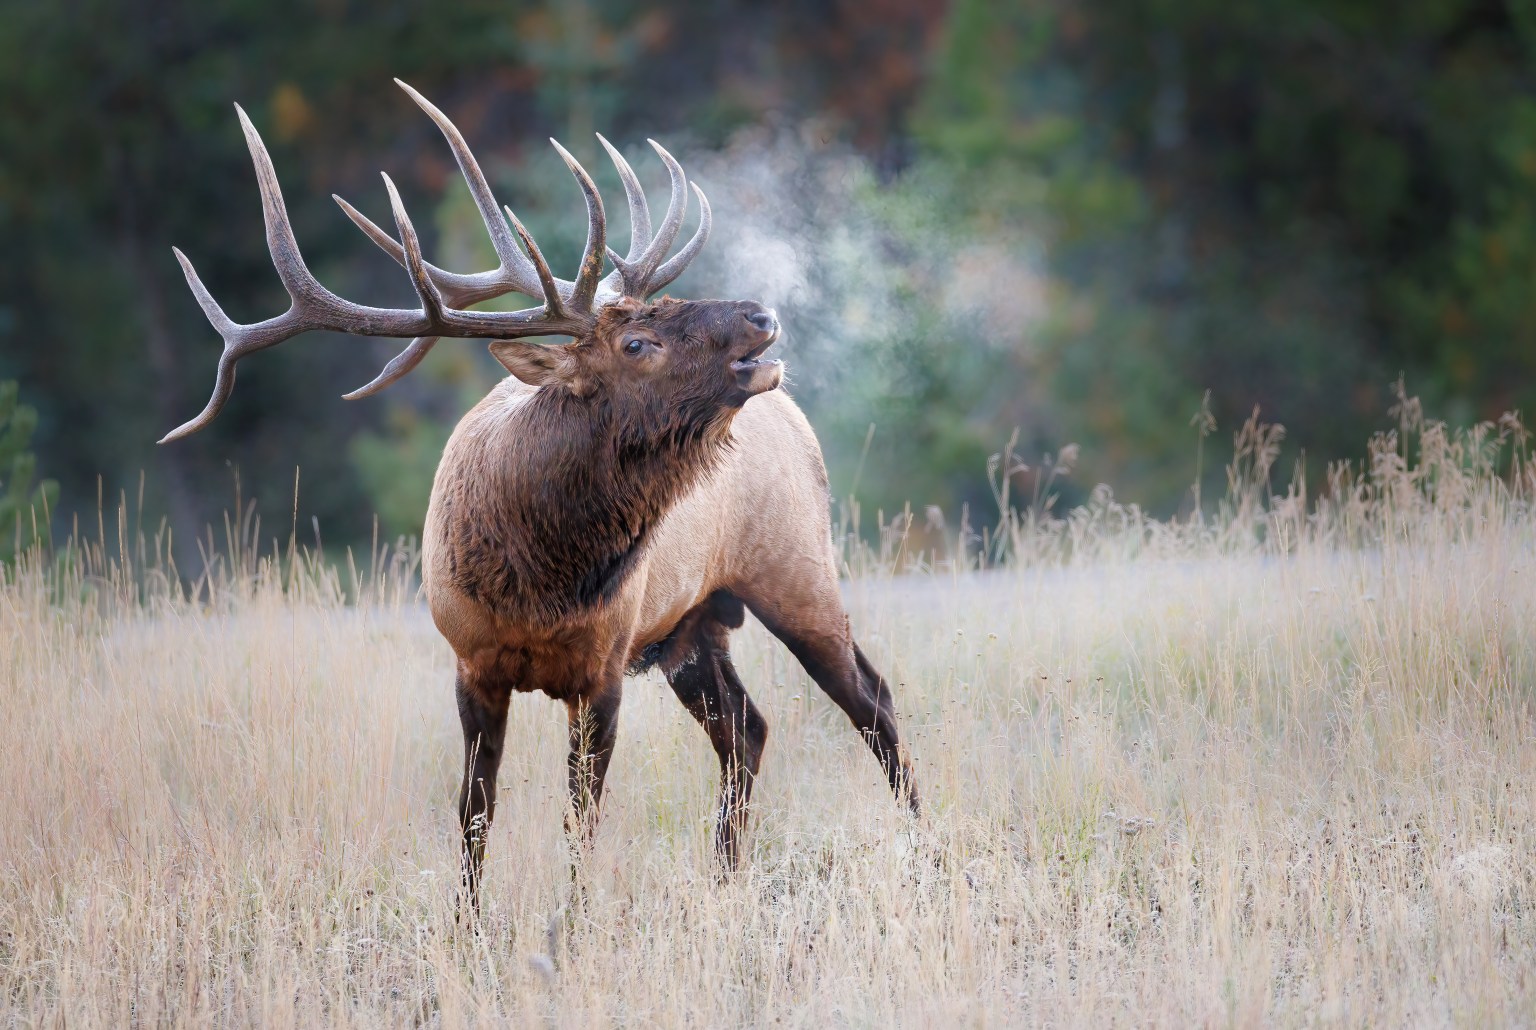 You can listen to the elk bugle